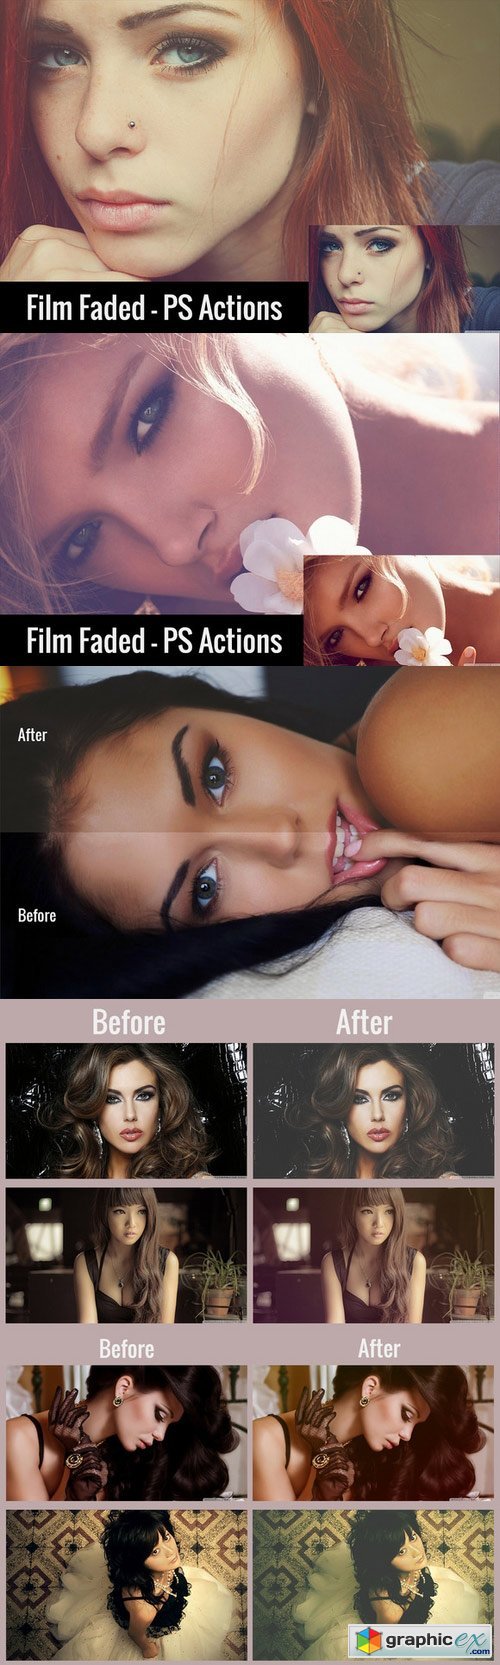 Film Faded - PS Actions